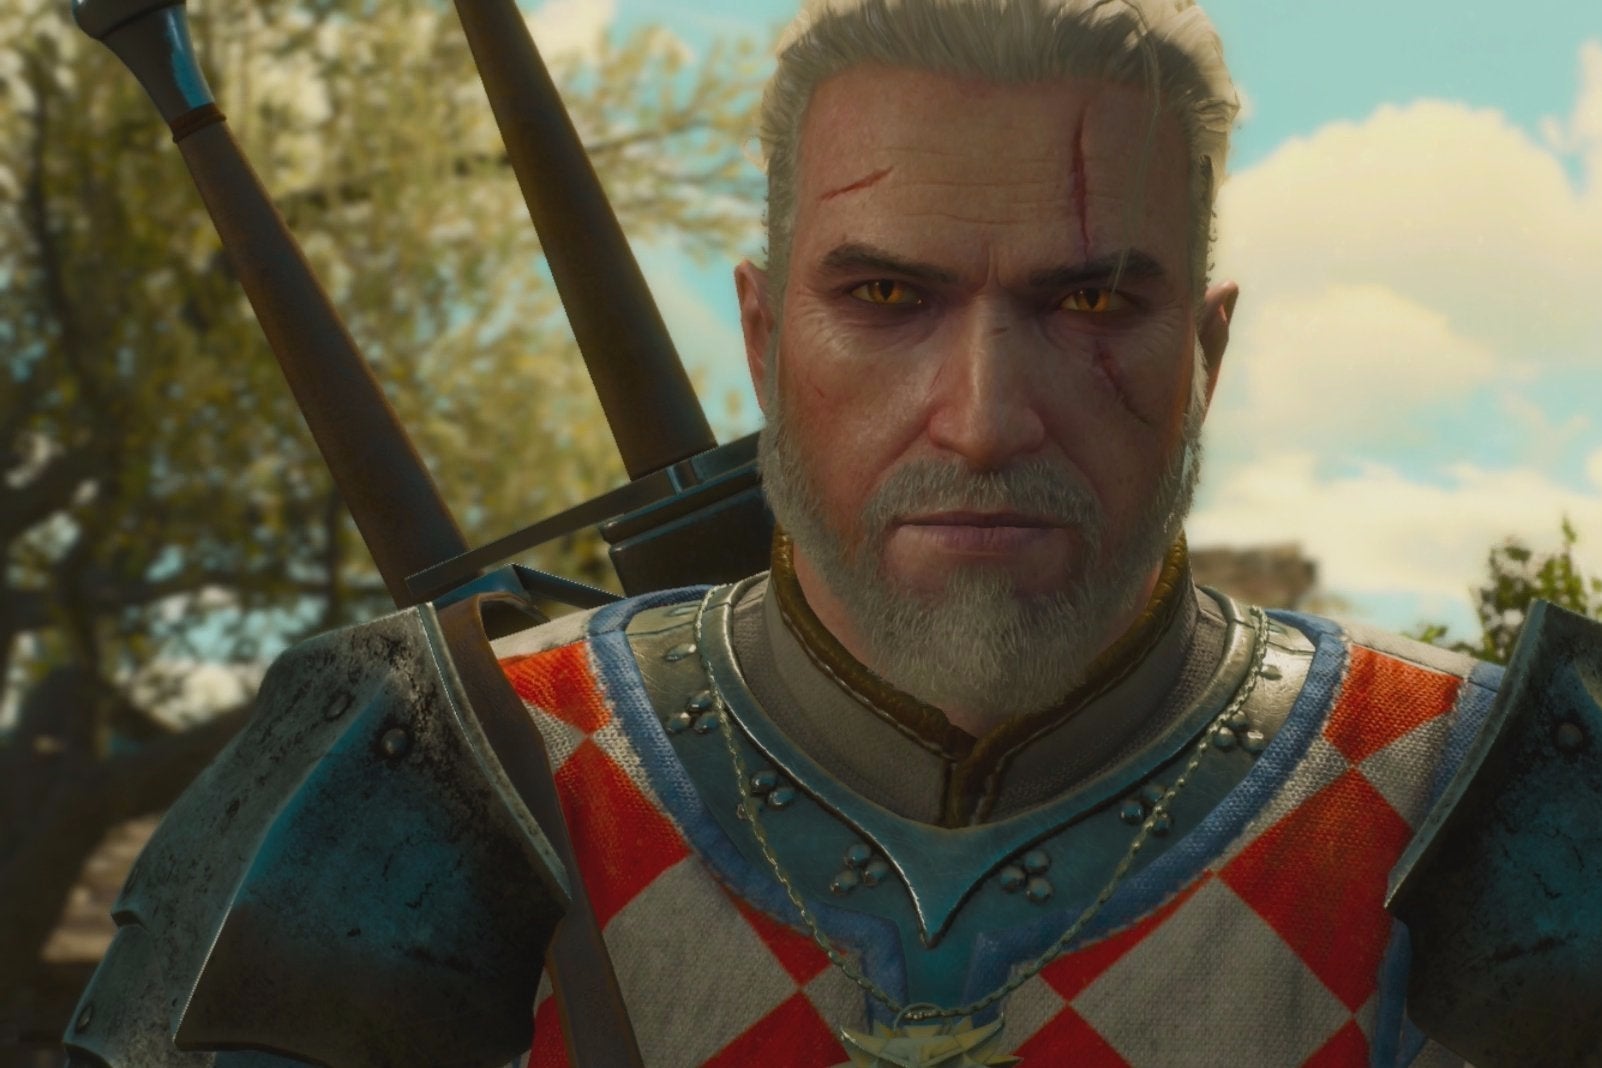 List of Hairstyles  The Witcher 3Game8